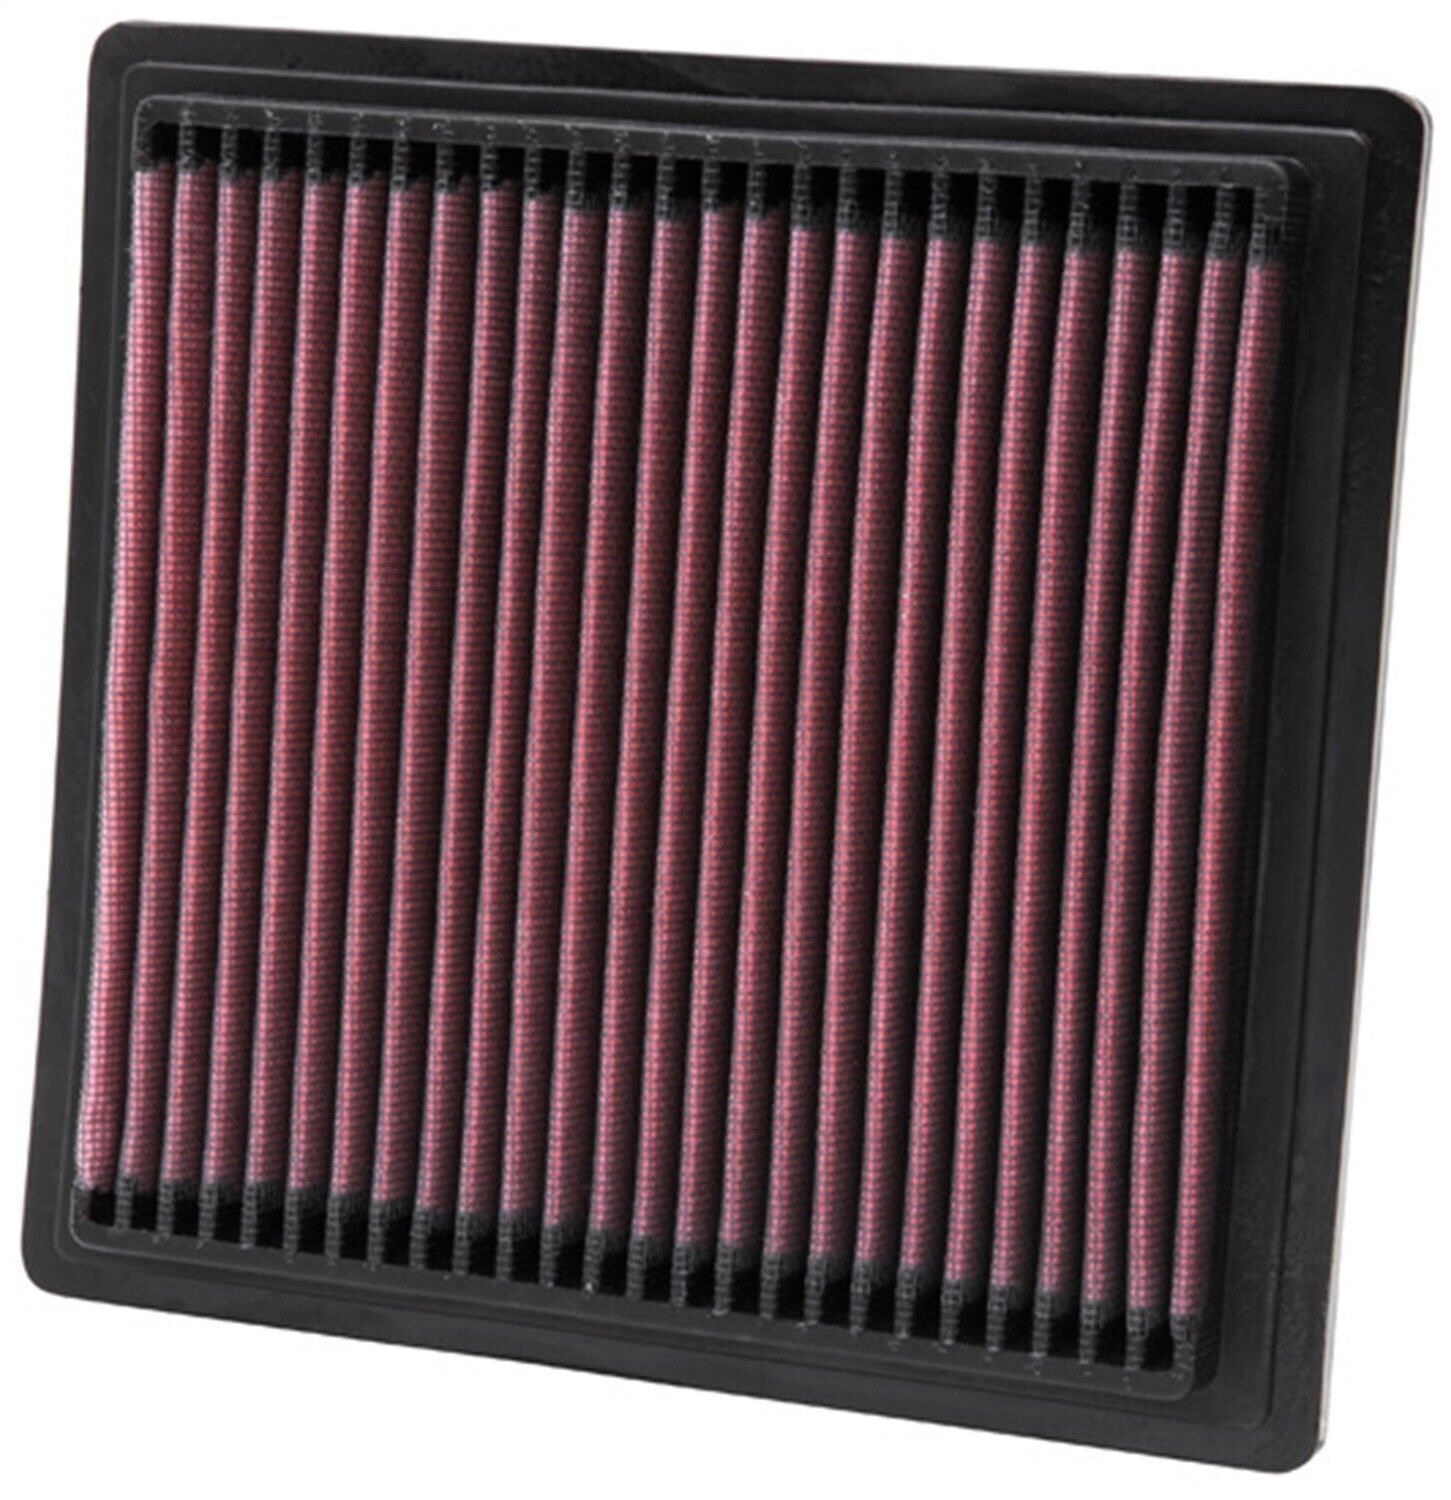 K&N Filters 33-2104 Air Filter Fits 96-01 Civic CR-V